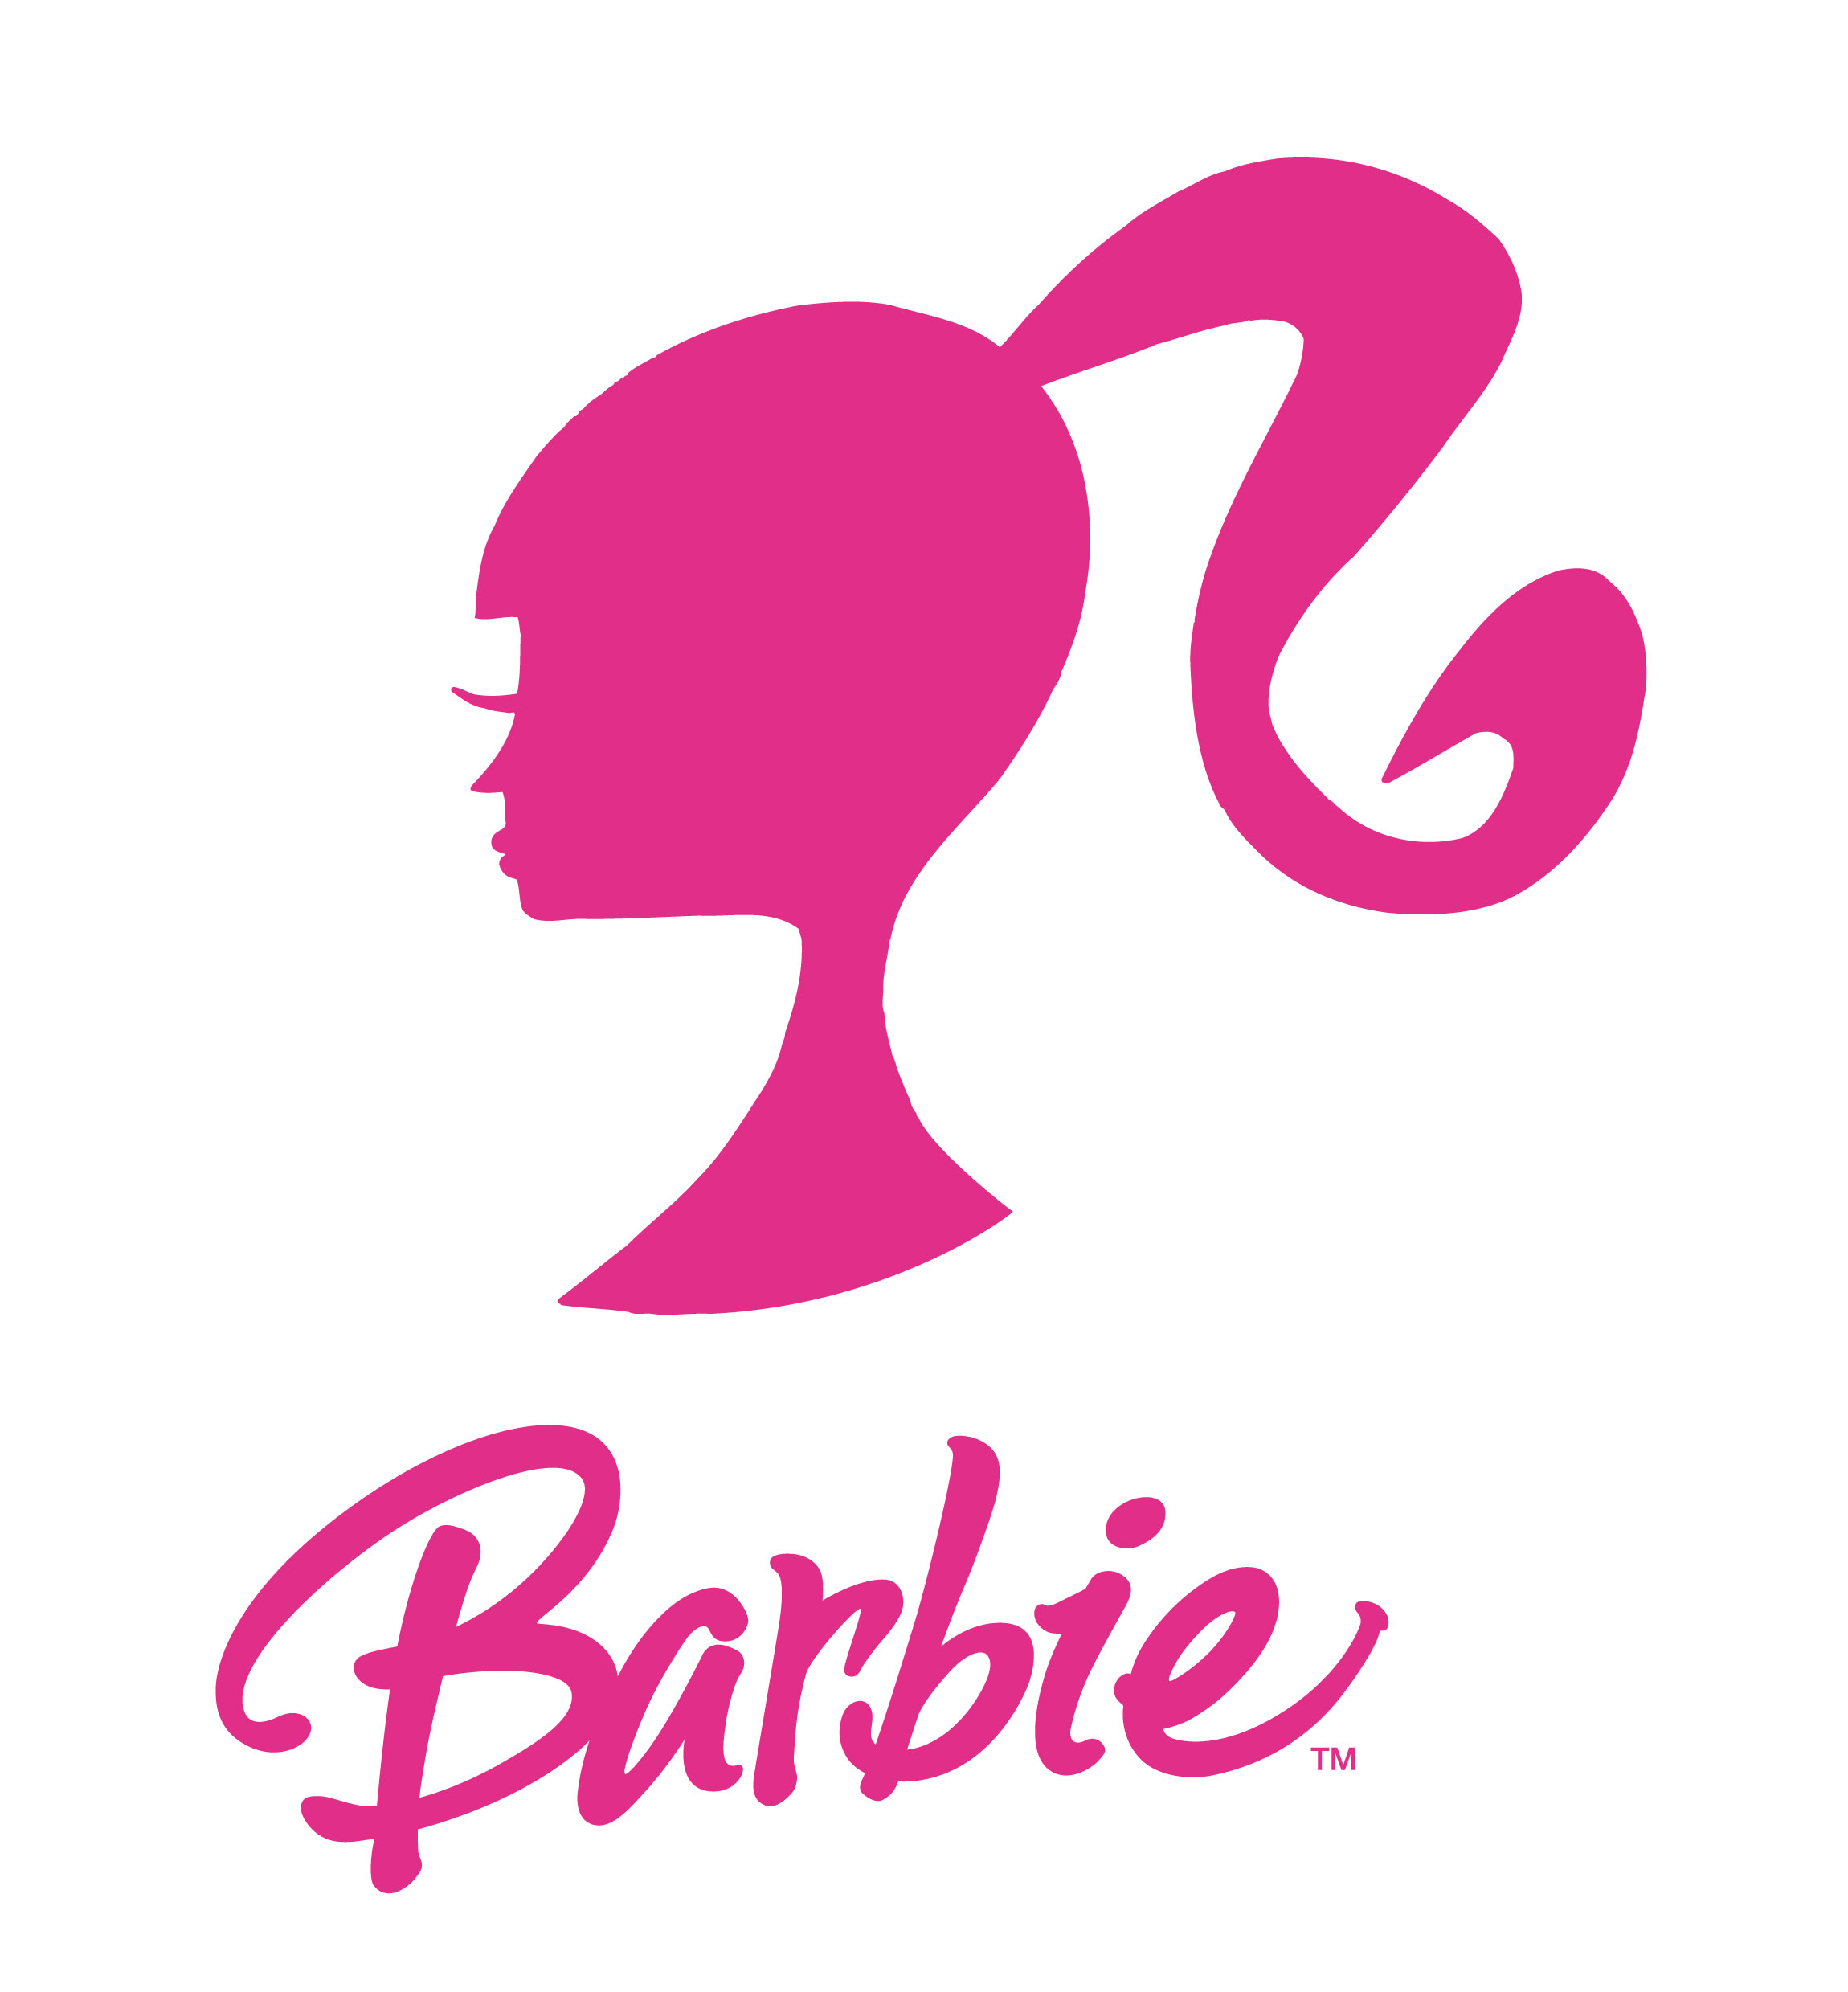 The Iconic Barbie Logo History, Evolution, and Meaning